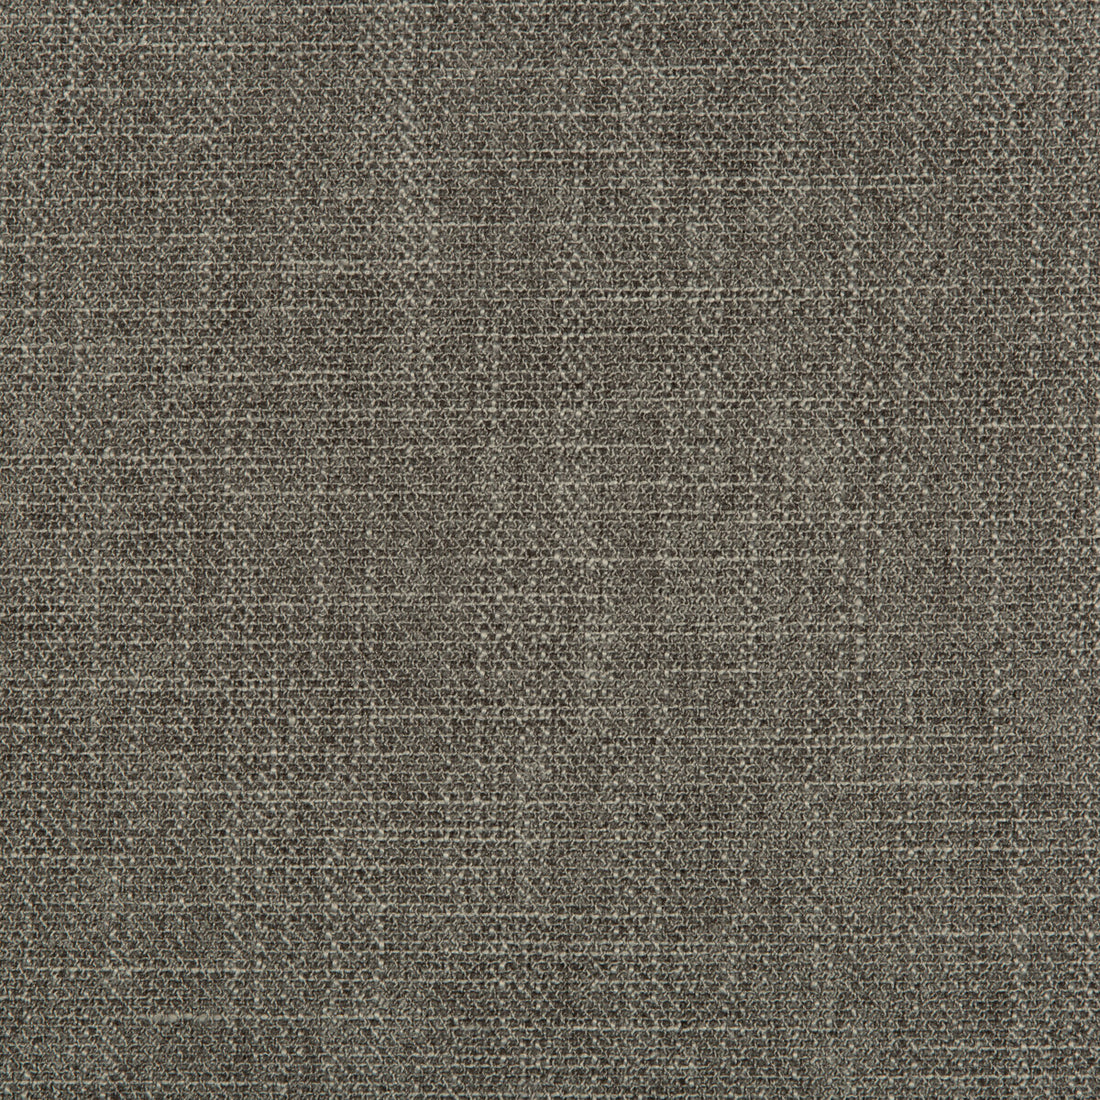 Kravet Contract fabric in 35404-21 color - pattern 35404.21.0 - by Kravet Contract in the Crypton Incase collection